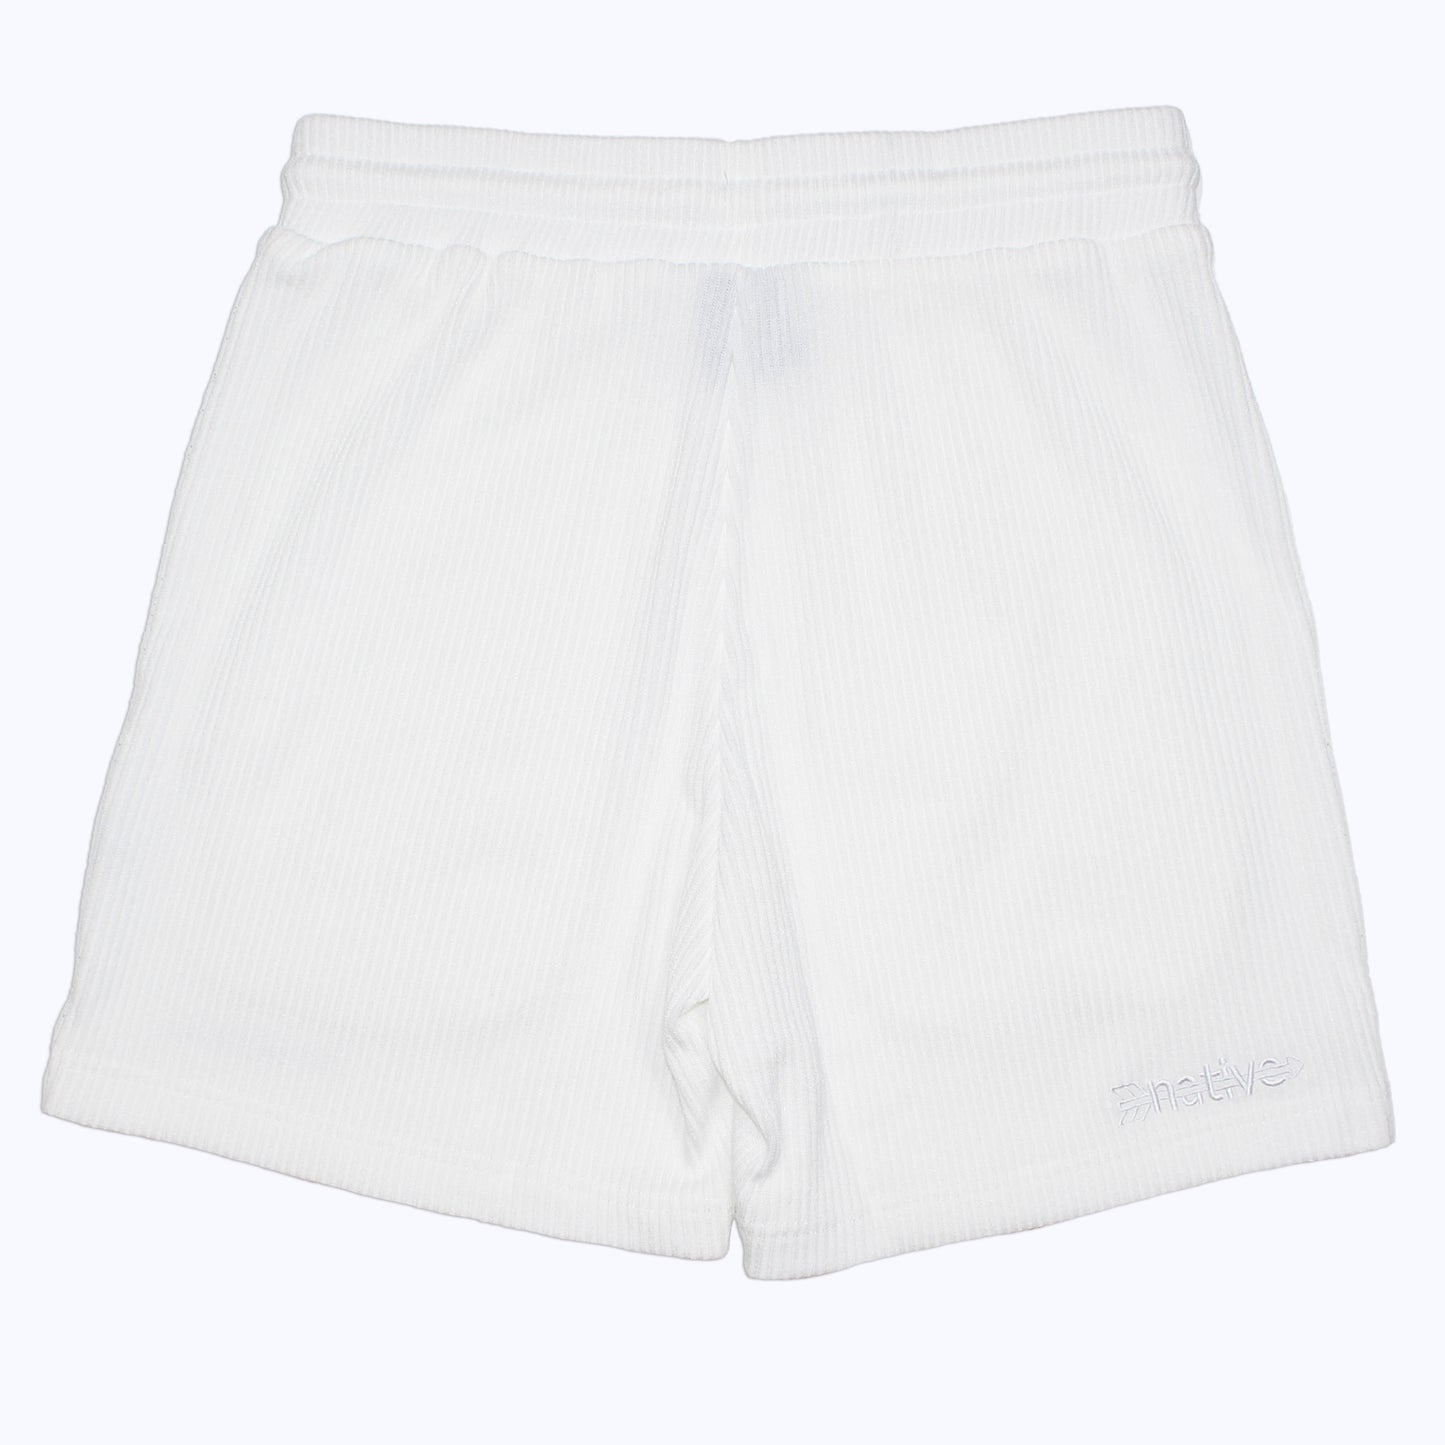 corduroy knit shorts in whiteout